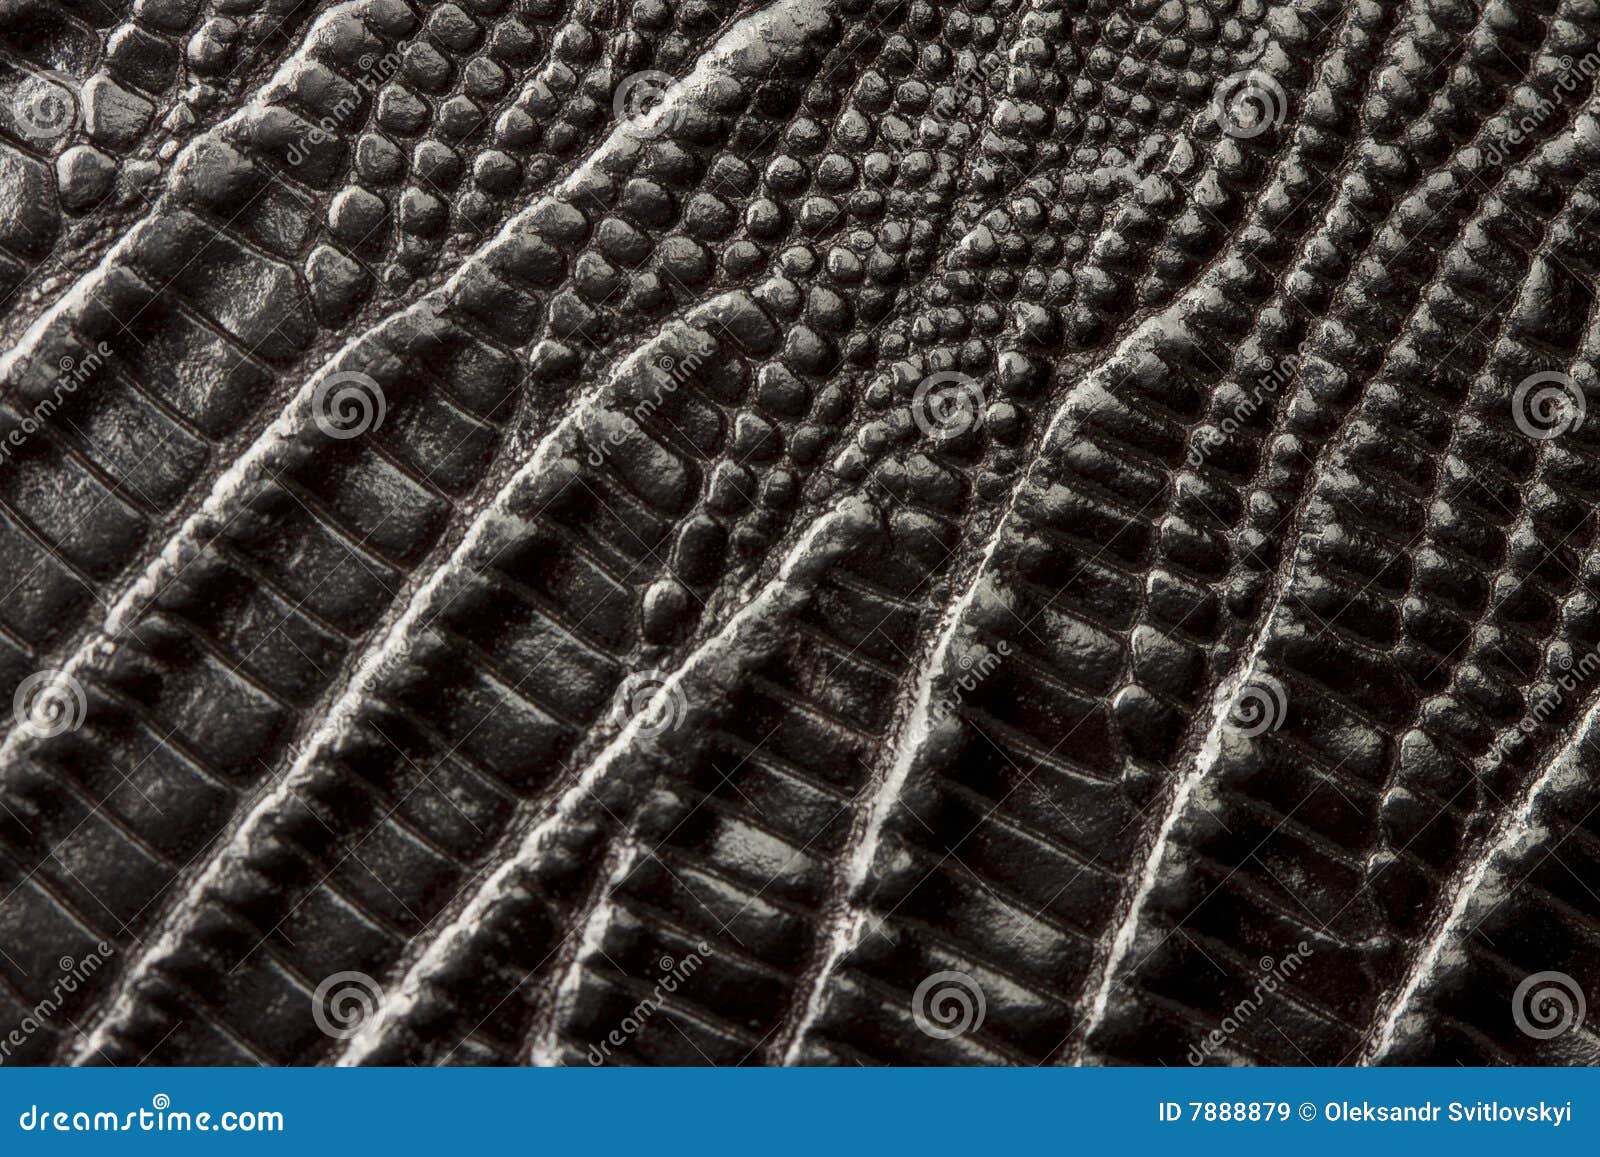 Close Up Crocodile Leather Texture Background In Green Stock Photo, Picture  and Royalty Free Image. Image 37907878.